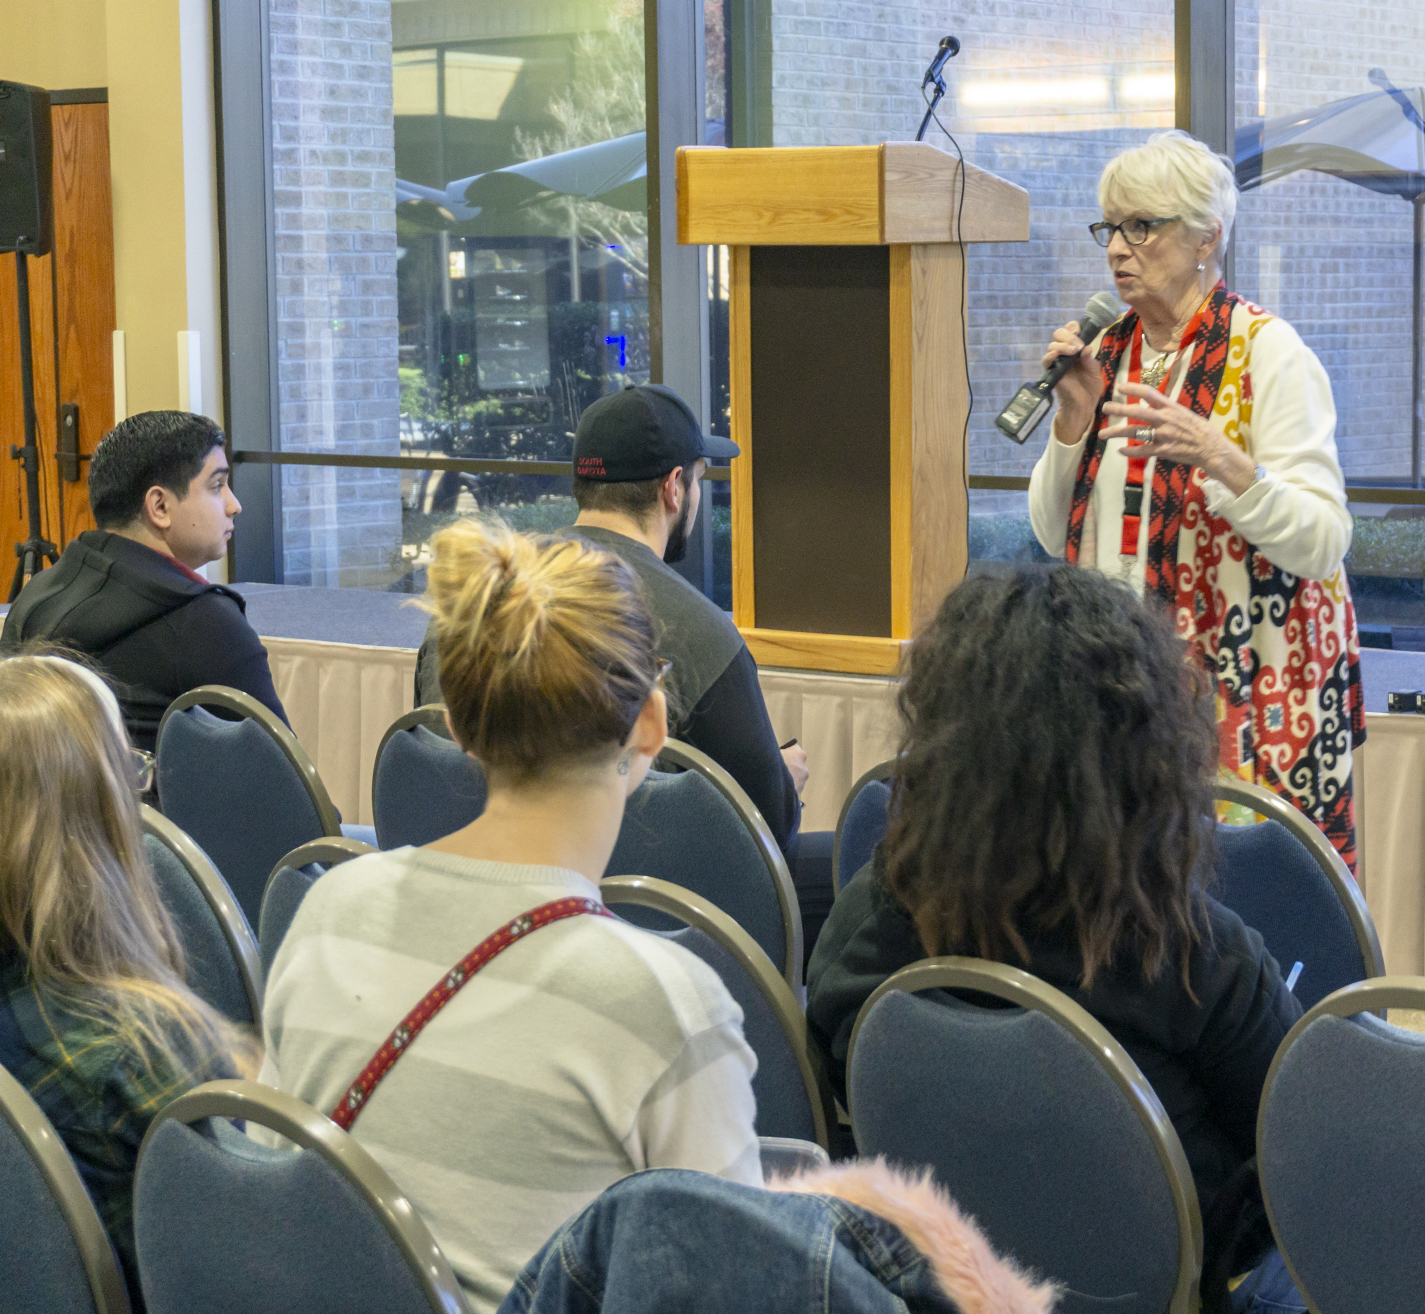 NE interim campus president Tahita Fulkerson answers students’ questions during a town hall meeting Nov. 14 in the NSTU dining area on NE Campus. The event was hosted by NE’s SGA, and students were able to express their concerns directly to the president and her staff.